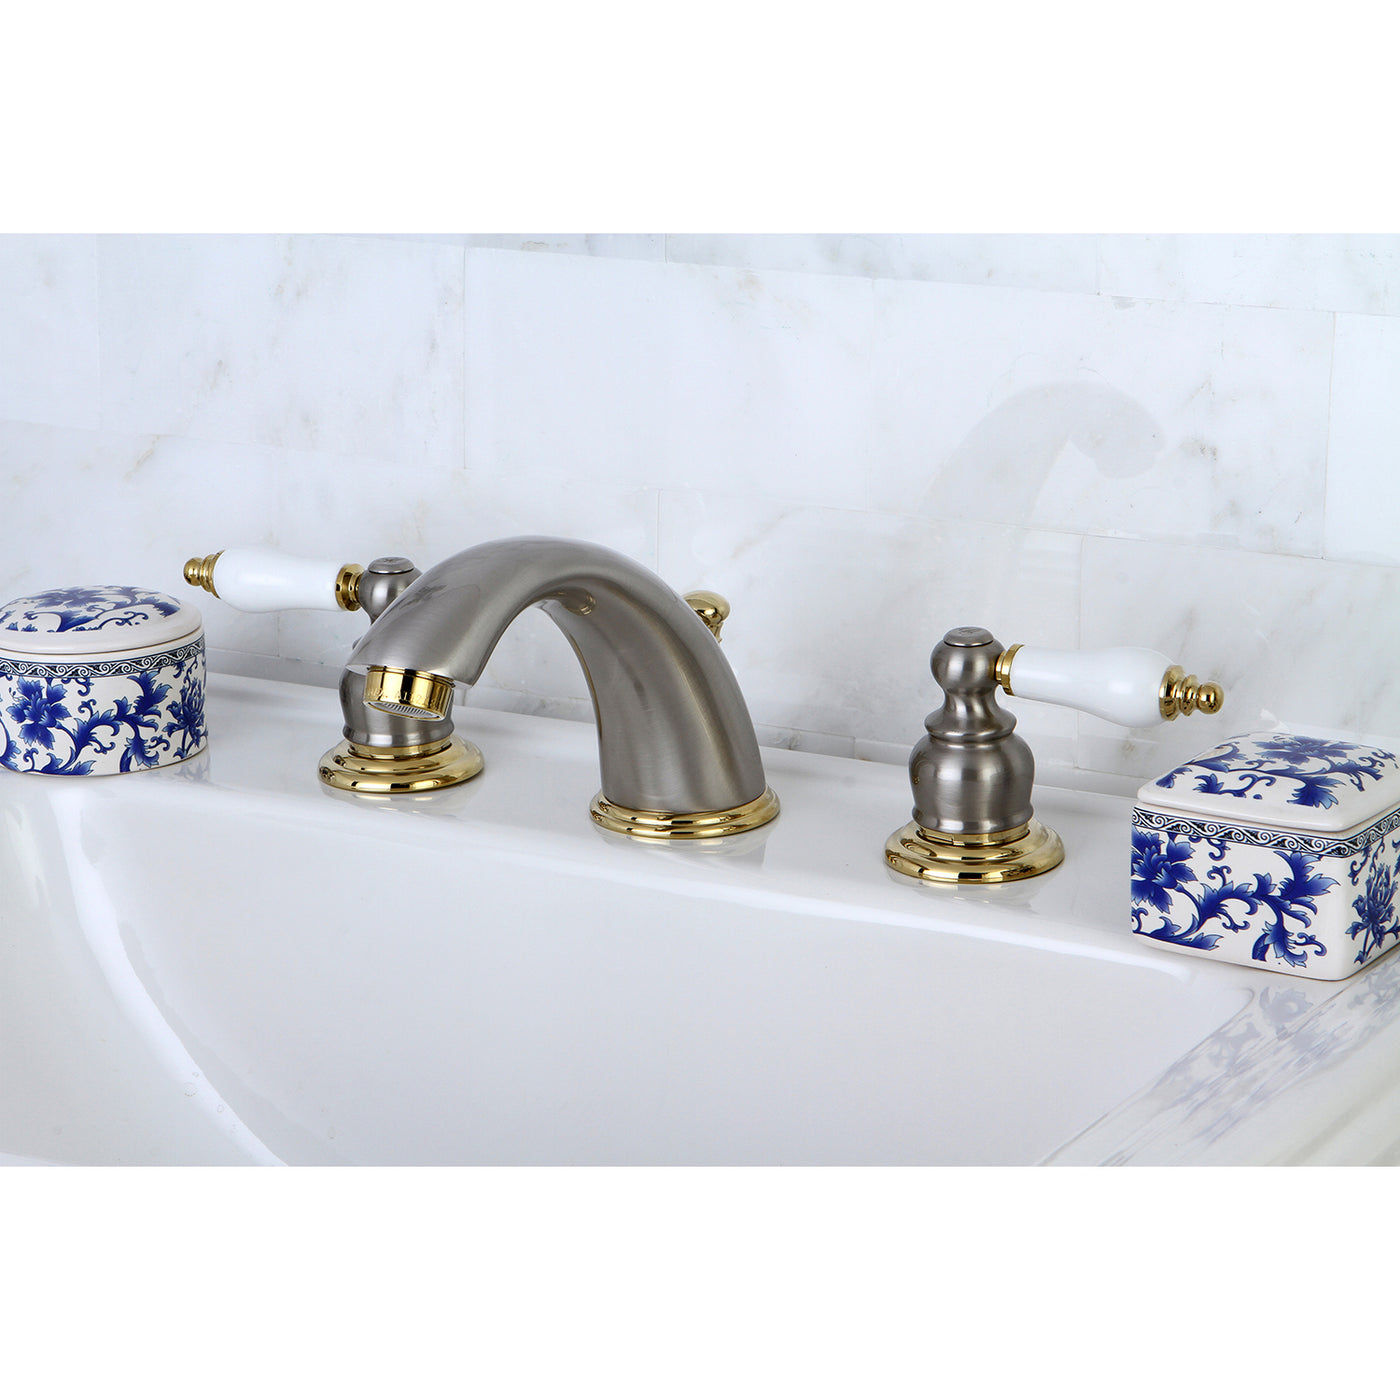 Elements of Design EB979B Widespread Bathroom Faucet with Retail Pop-Up, Brushed Nickel/Polished Brass